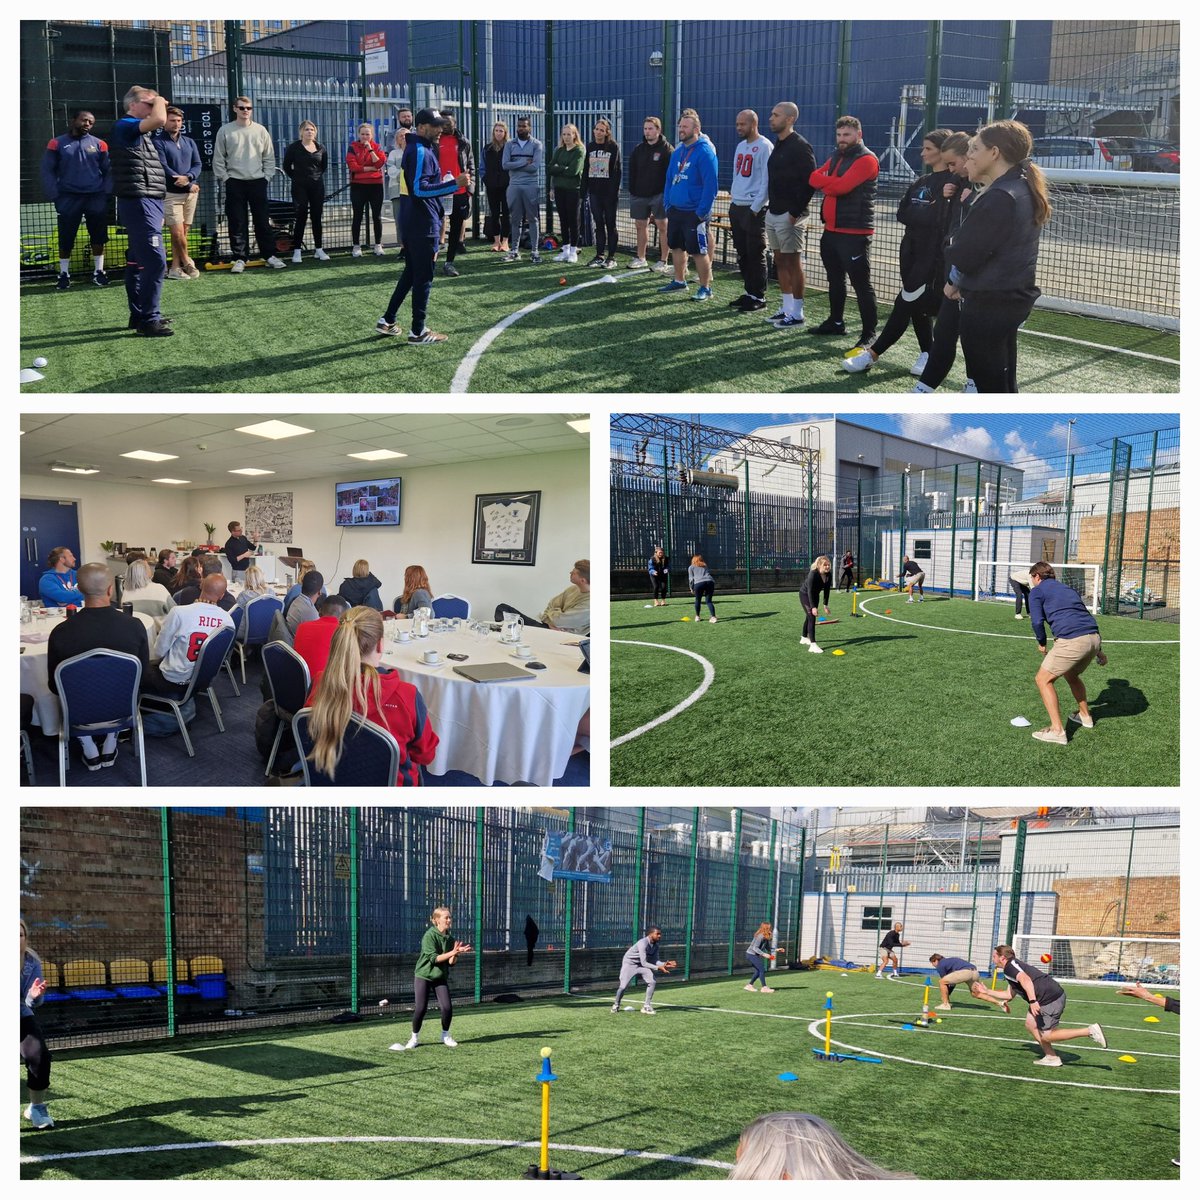 Inspiring day at our Primary PE Networking Forum at @AFCWimbledon Plough Lane on Friday. Fantastic contributions from Kiyo & Jamie from @SpencerCricket, Ben from @LondonMarathon Events & Andy from @AFCW_Foundation. The hard work starts here! @YouthSportTrust @YourSchoolGames!